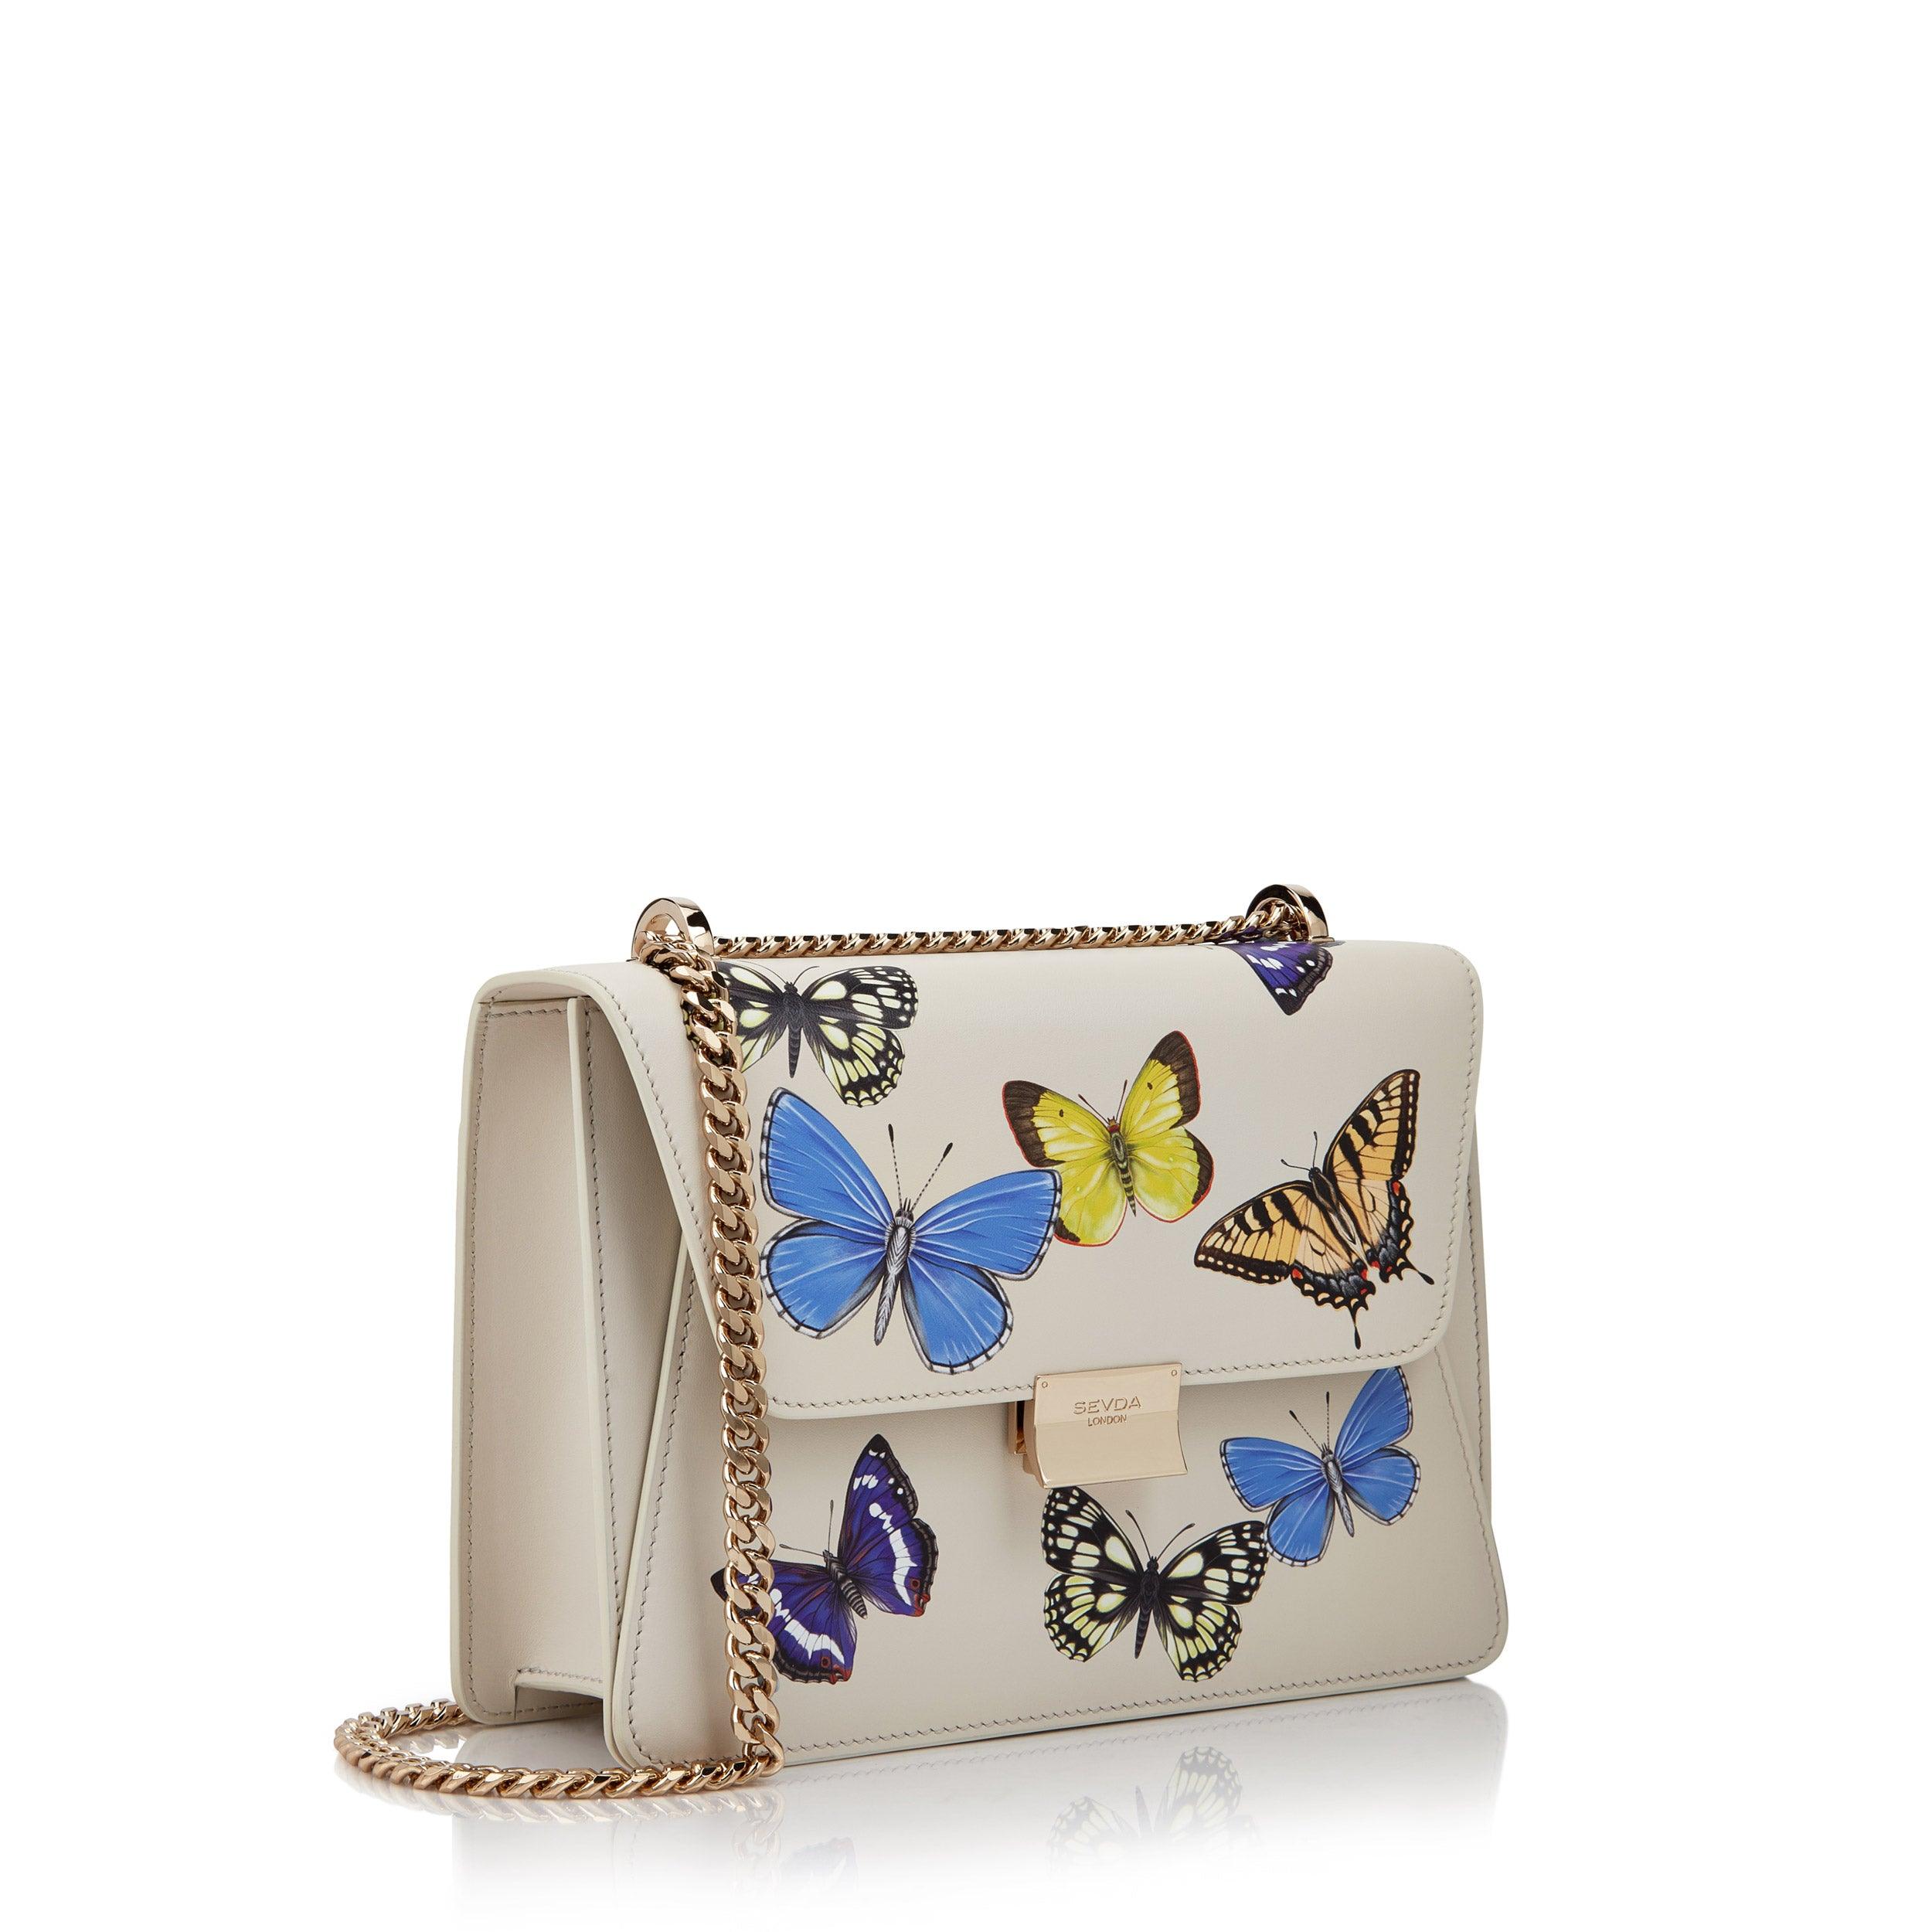 Off White Butterfly Designer Shoulder Bag with Gold Chain - A fusion of London's flair and Italian craftsmanship.